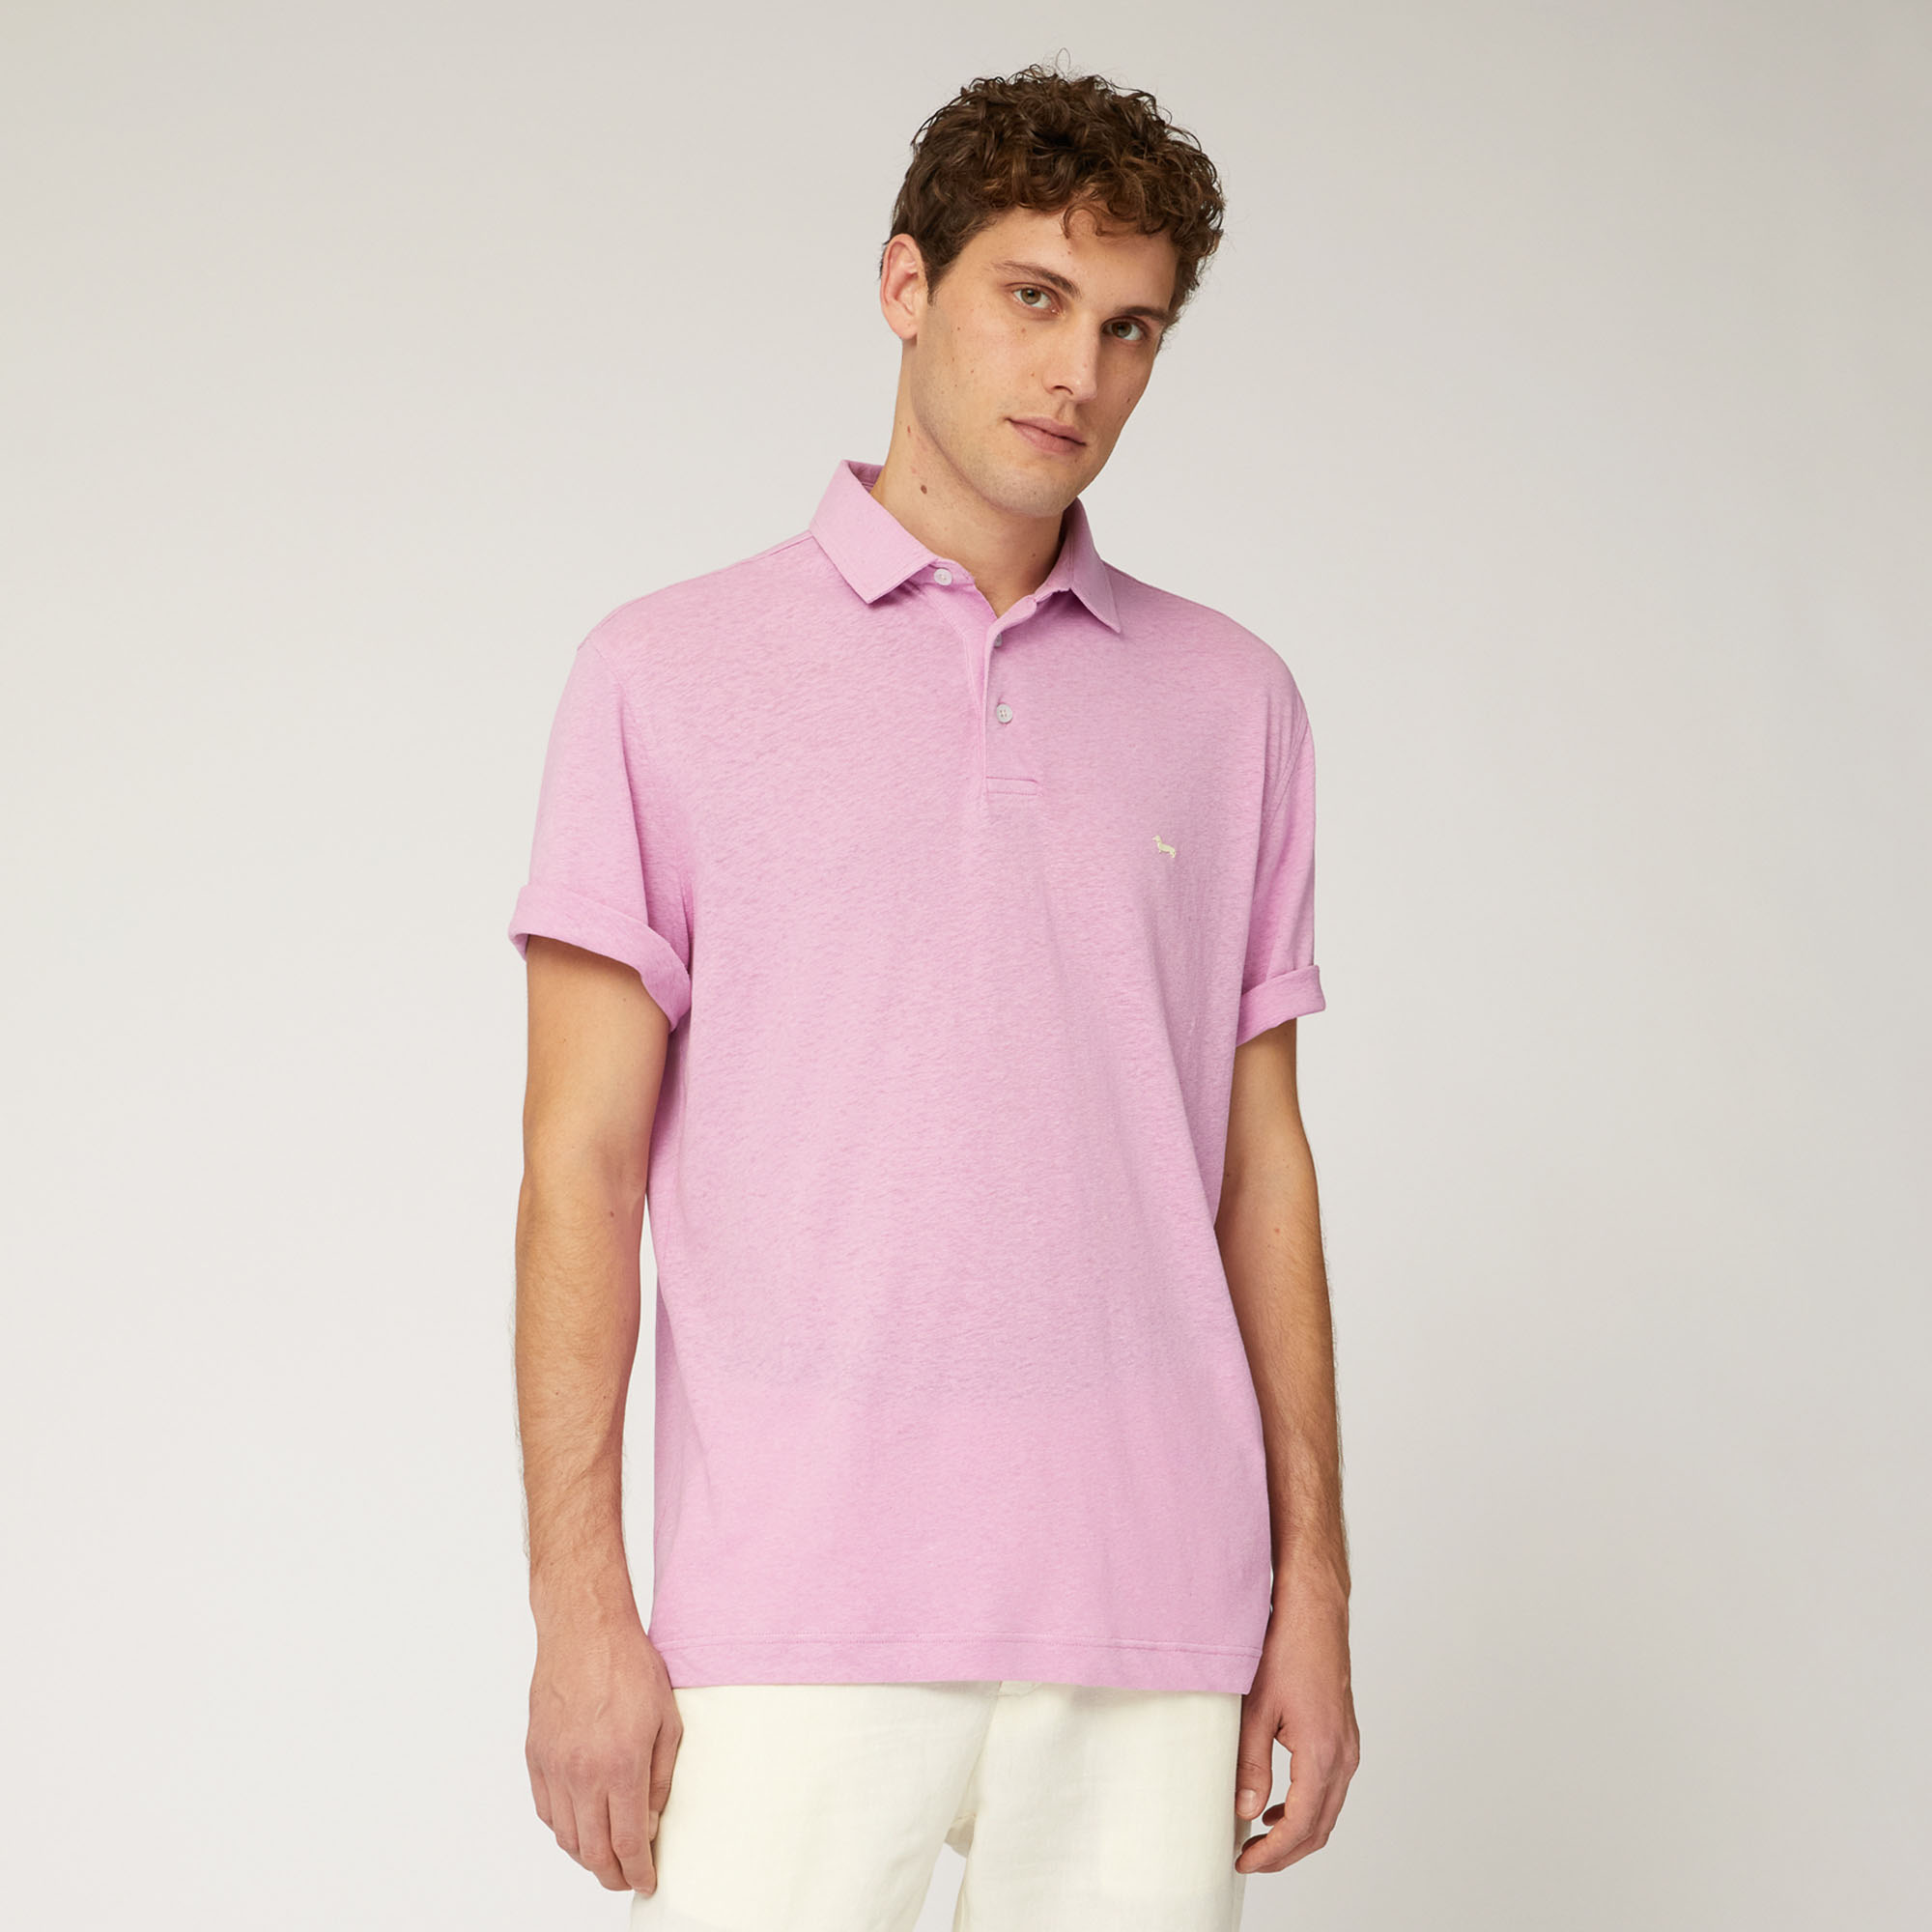 Cotton and Linen Jersey Polo, Lilac, large